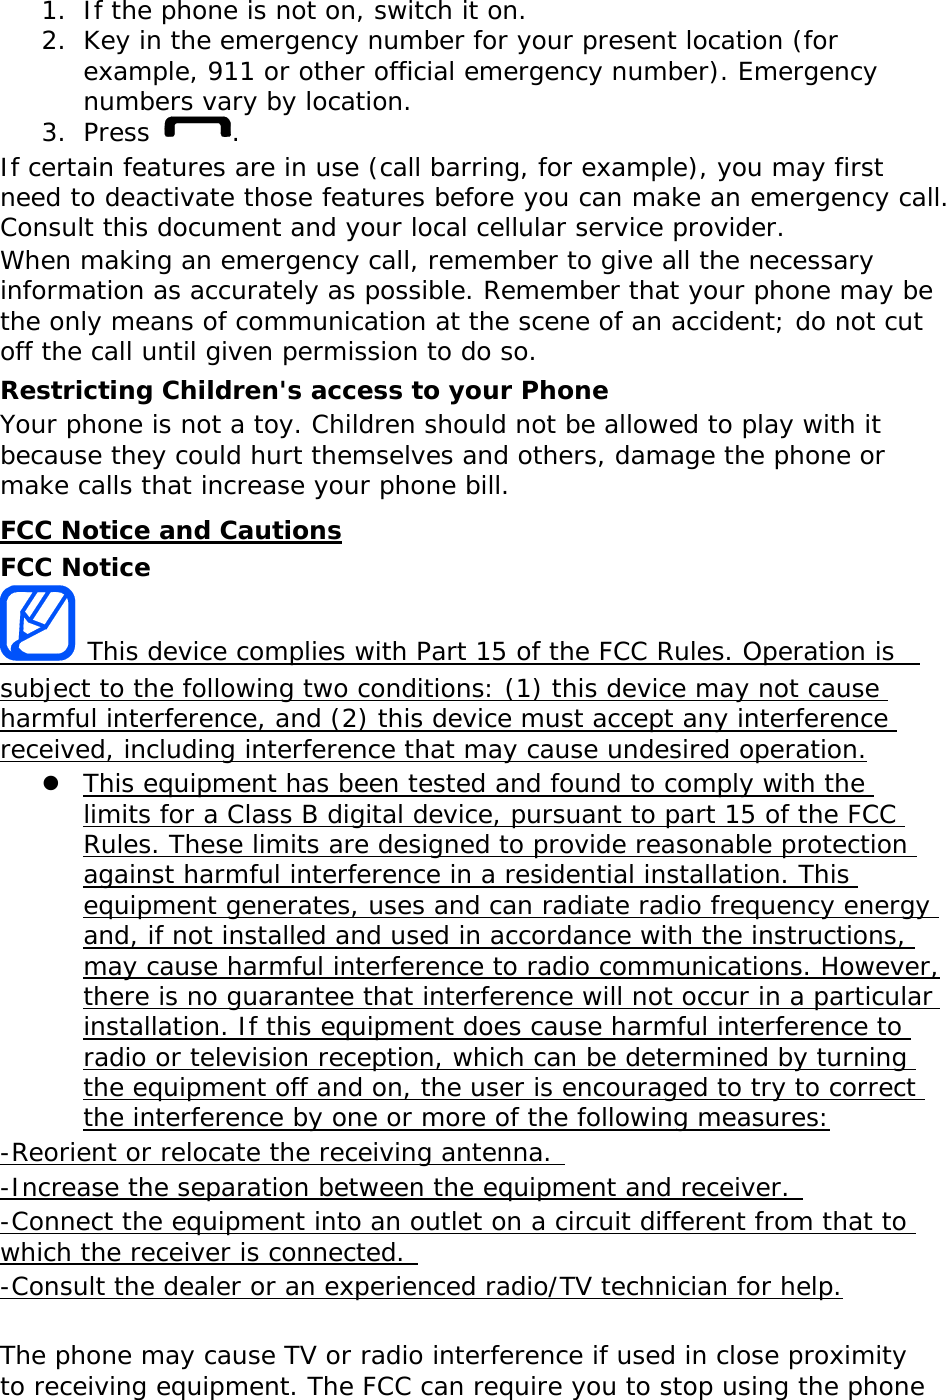 1. If the phone is not on, switch it on. 2. Key in the emergency number for your present location (for example, 911 or other official emergency number). Emergency numbers vary by location. 3. Press  . If certain features are in use (call barring, for example), you may first need to deactivate those features before you can make an emergency call. Consult this document and your local cellular service provider. When making an emergency call, remember to give all the necessary information as accurately as possible. Remember that your phone may be the only means of communication at the scene of an accident; do not cut off the call until given permission to do so. Restricting Children&apos;s access to your Phone Your phone is not a toy. Children should not be allowed to play with it because they could hurt themselves and others, damage the phone or make calls that increase your phone bill. FCC Notice and Cautions FCC Notice  This device complies with Part 15 of the FCC Rules. Operation is  subject to the following two conditions: (1) this device may not cause harmful interference, and (2) this device must accept any interference received, including interference that may cause undesired operation. z This equipment has been tested and found to comply with the limits for a Class B digital device, pursuant to part 15 of the FCC Rules. These limits are designed to provide reasonable protection against harmful interference in a residential installation. This equipment generates, uses and can radiate radio frequency energy and, if not installed and used in accordance with the instructions, may cause harmful interference to radio communications. However, there is no guarantee that interference will not occur in a particular installation. If this equipment does cause harmful interference to radio or television reception, which can be determined by turning the equipment off and on, the user is encouraged to try to correct the interference by one or more of the following measures: -Reorient or relocate the receiving antenna.  -Increase the separation between the equipment and receiver.  -Connect the equipment into an outlet on a circuit different from that to which the receiver is connected.  -Consult the dealer or an experienced radio/TV technician for help.  The phone may cause TV or radio interference if used in close proximity to receiving equipment. The FCC can require you to stop using the phone 